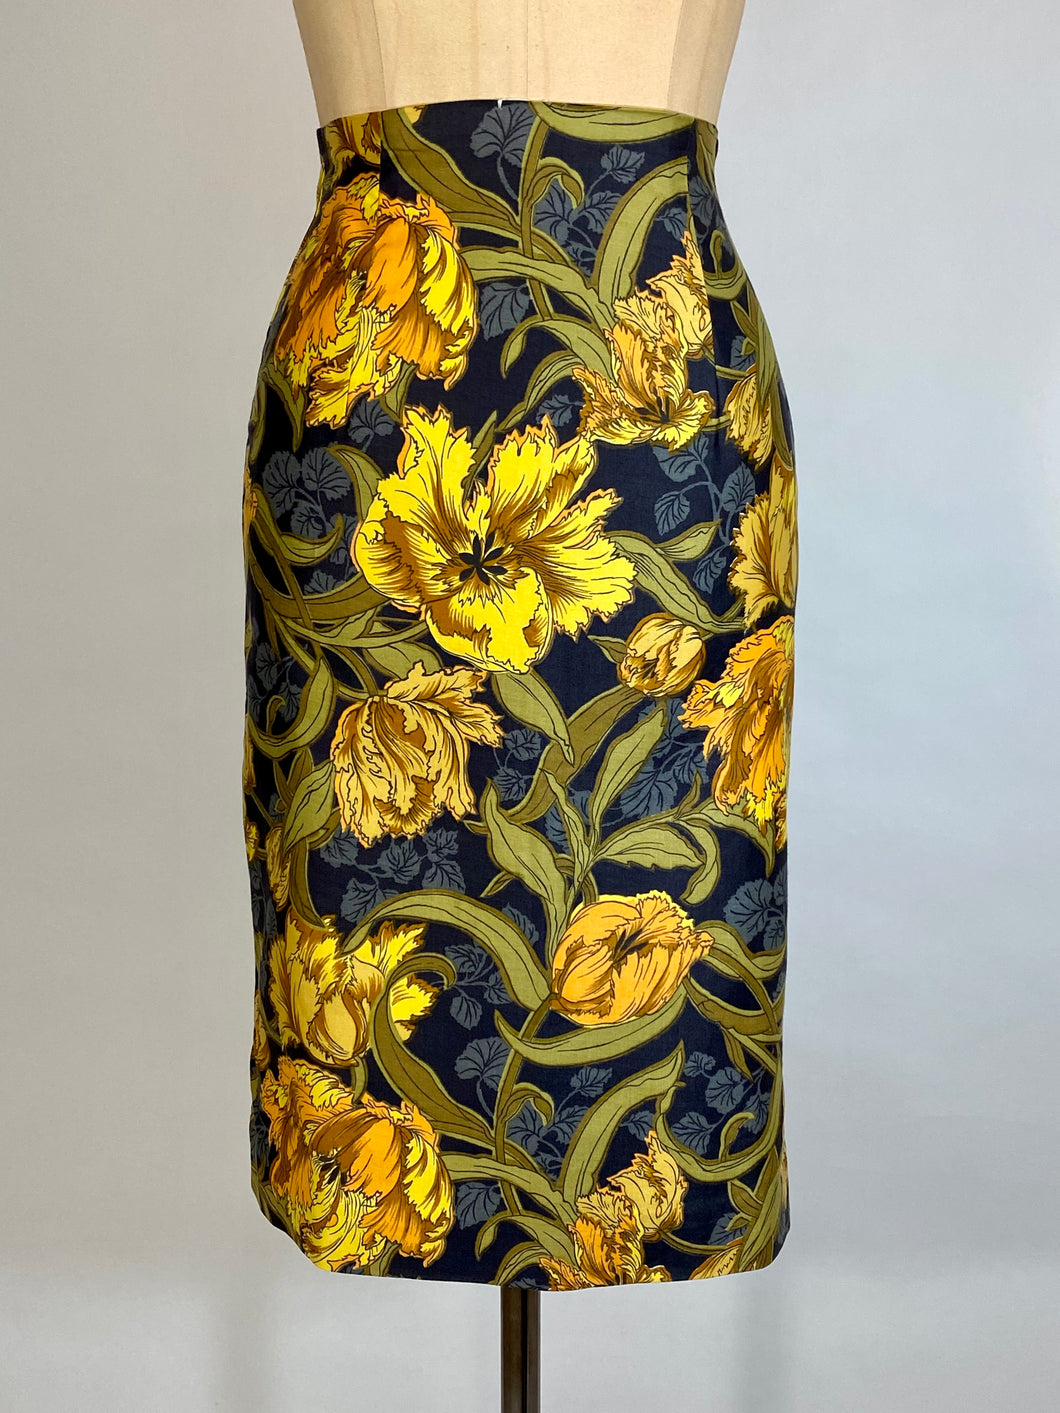 1950’s-60’s reversible golden ochre yellow & floral print cotton pencil skirt Deadstock New with Tags!